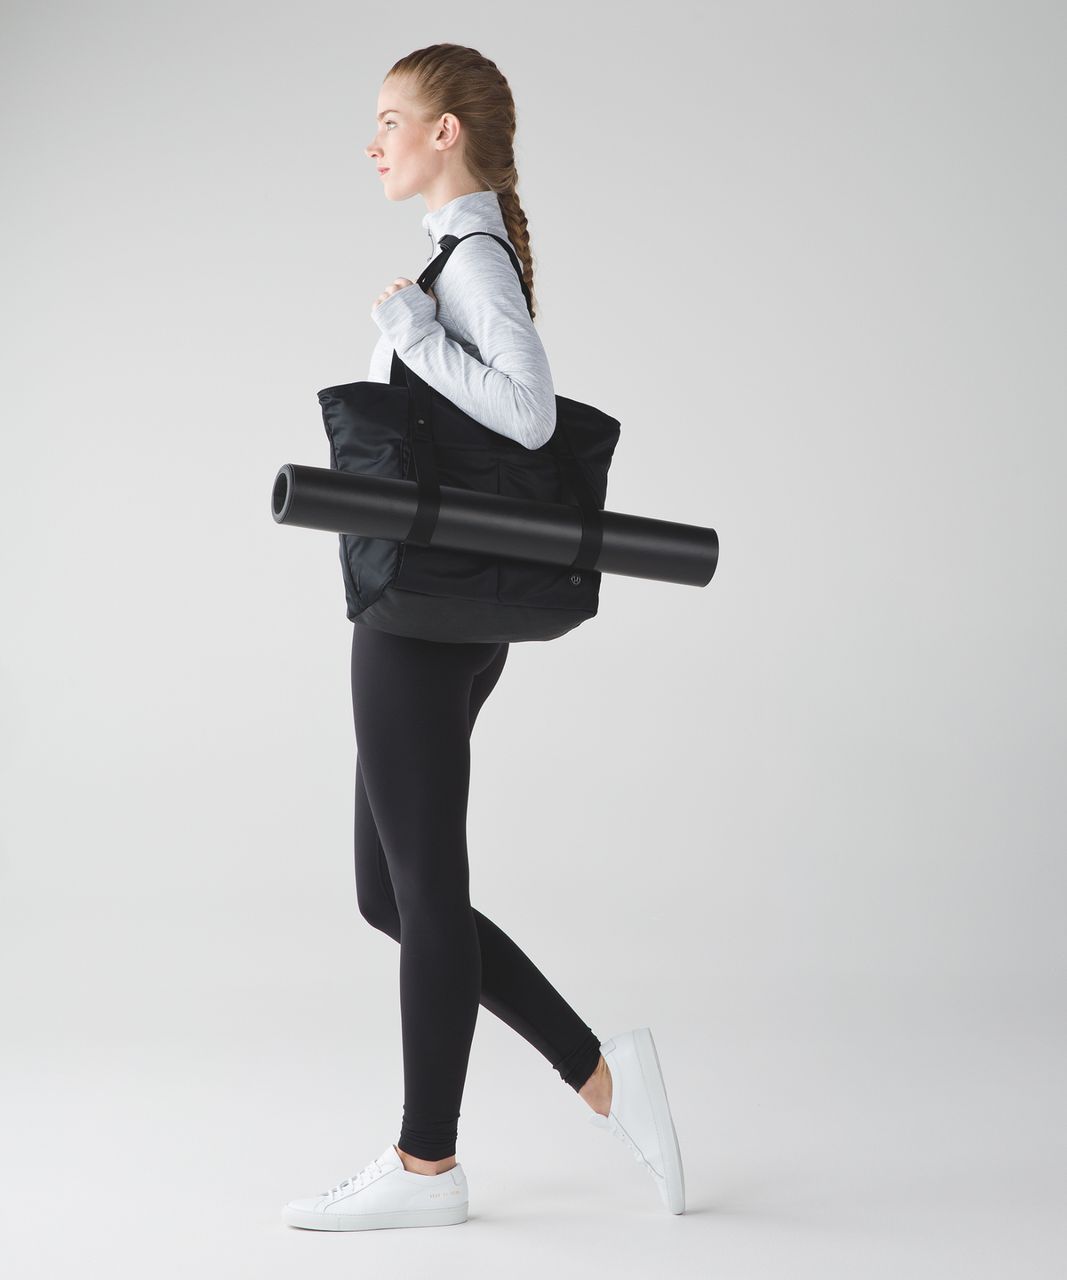 Lululemon Live Free Tote - Black (First Release)